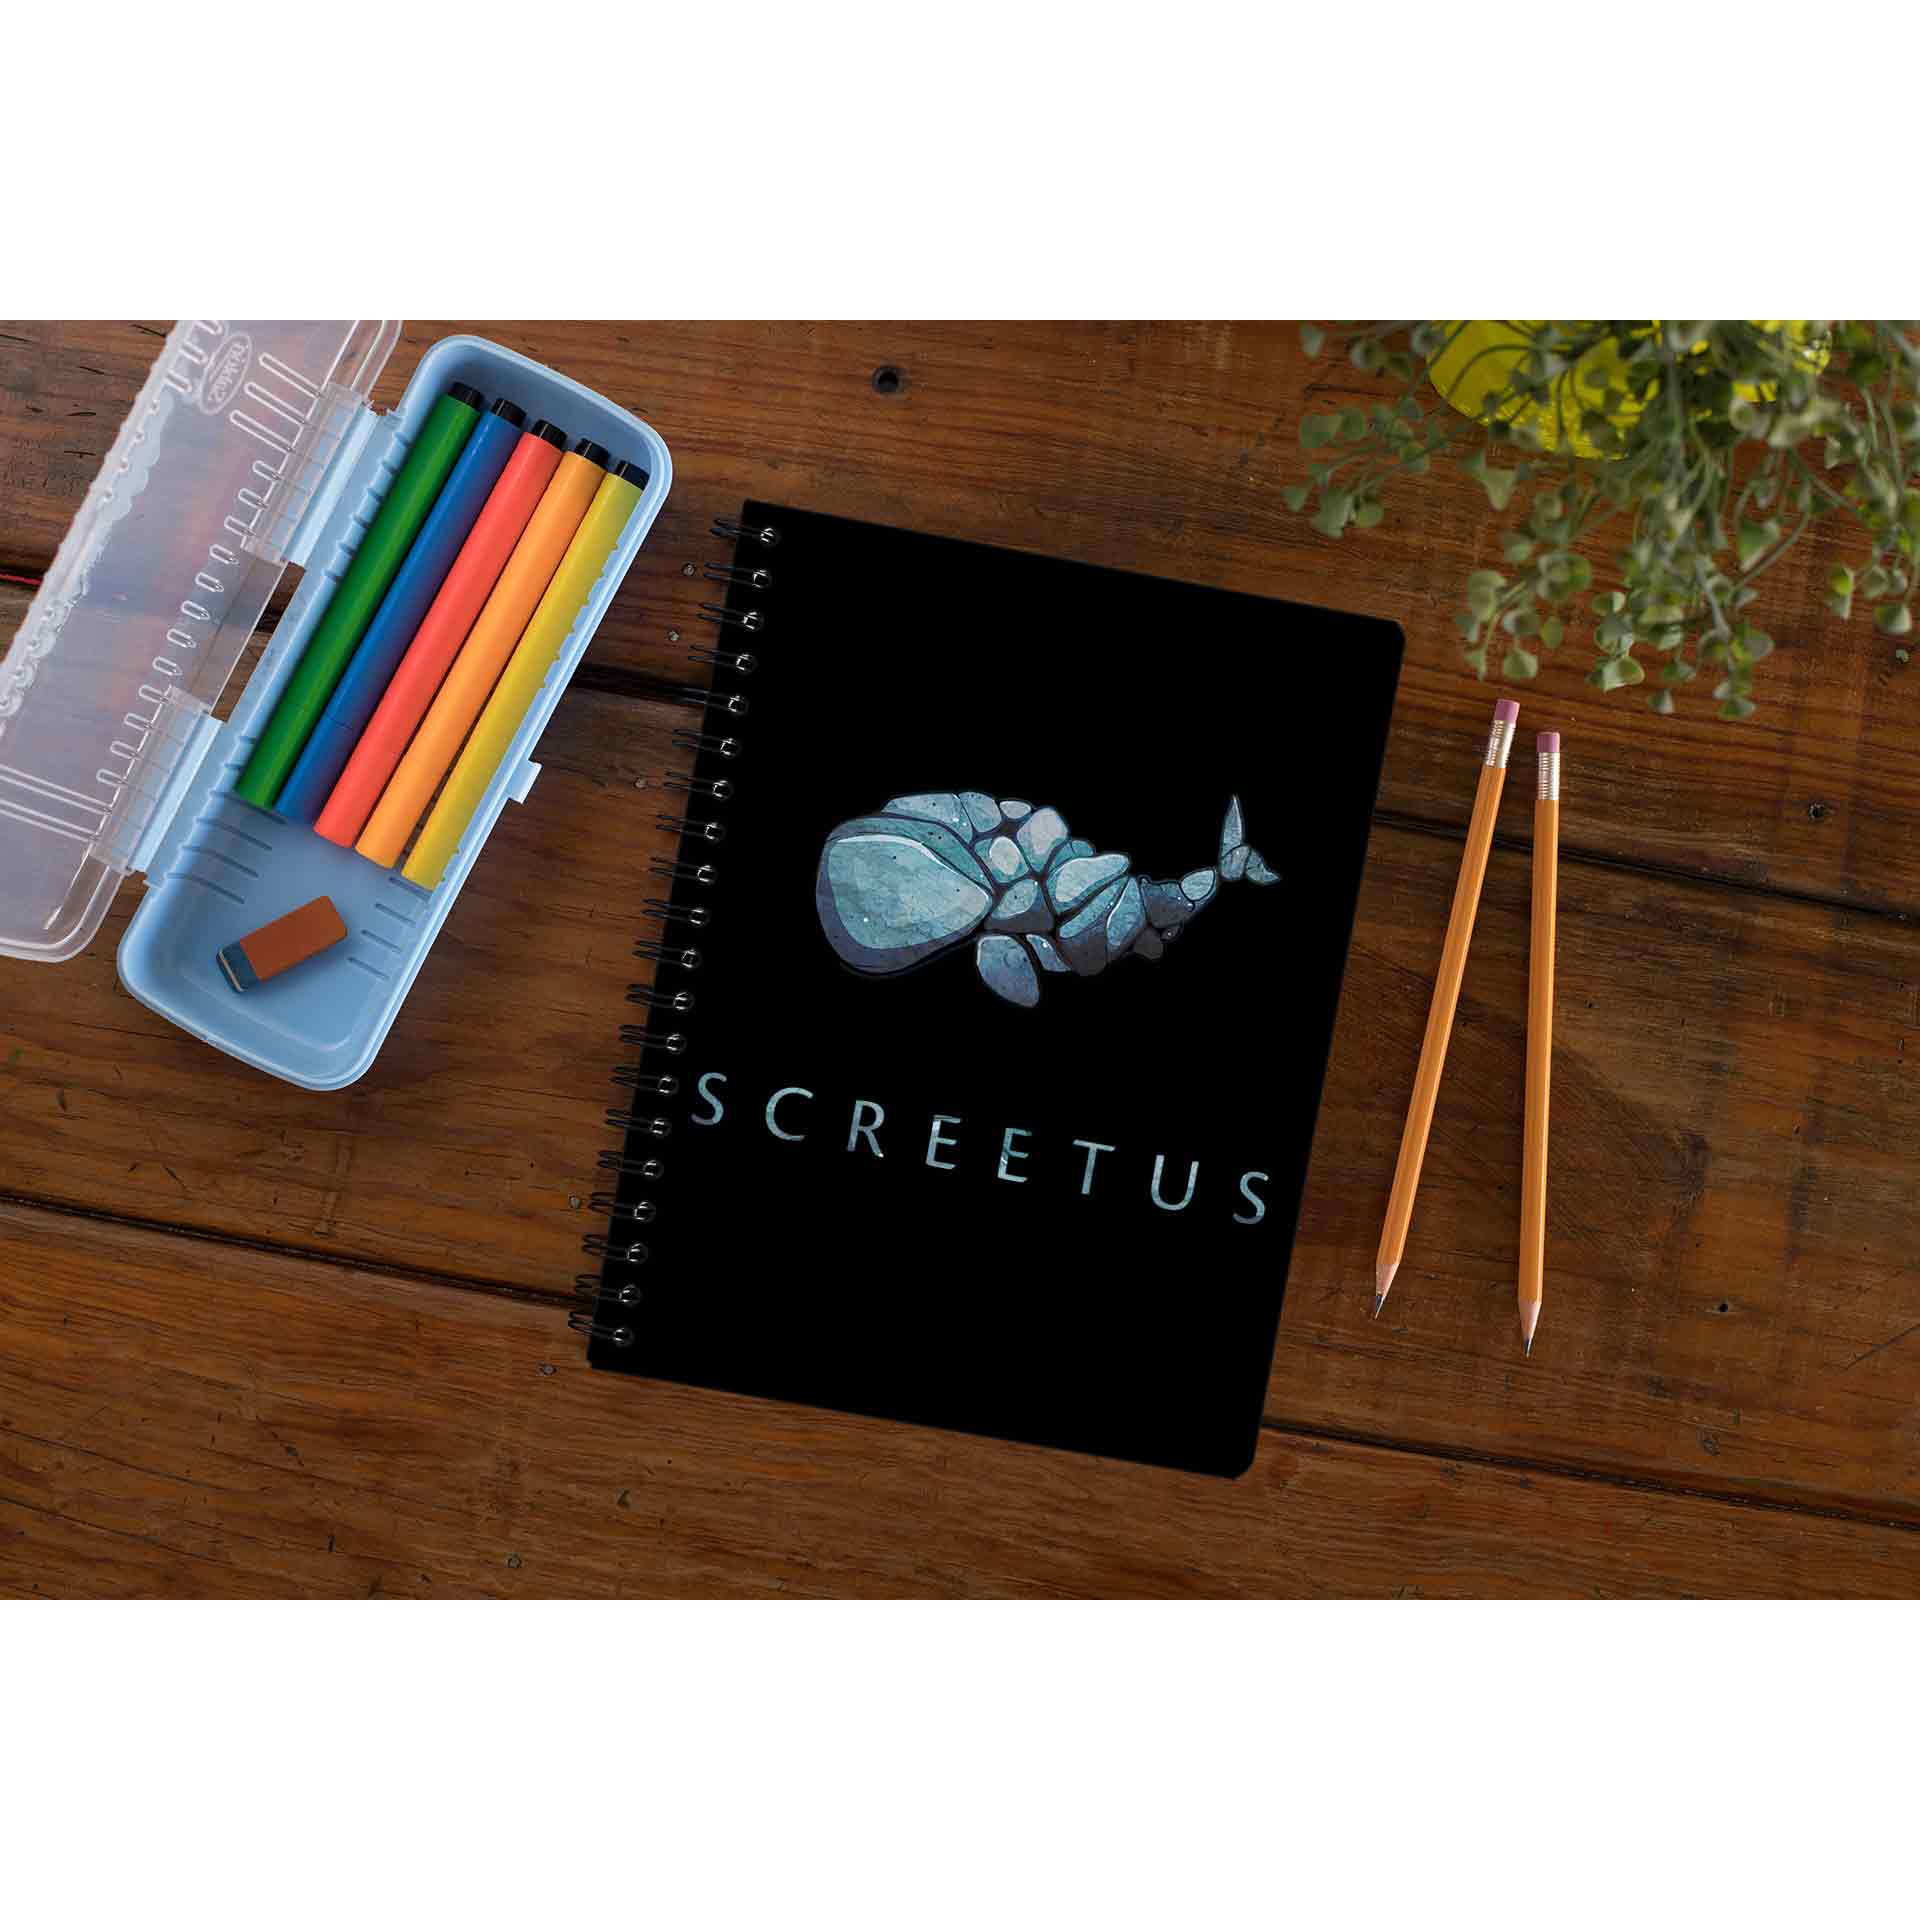 screetus logo notebook notepad diary buy online india the banyan tee tbt unruled